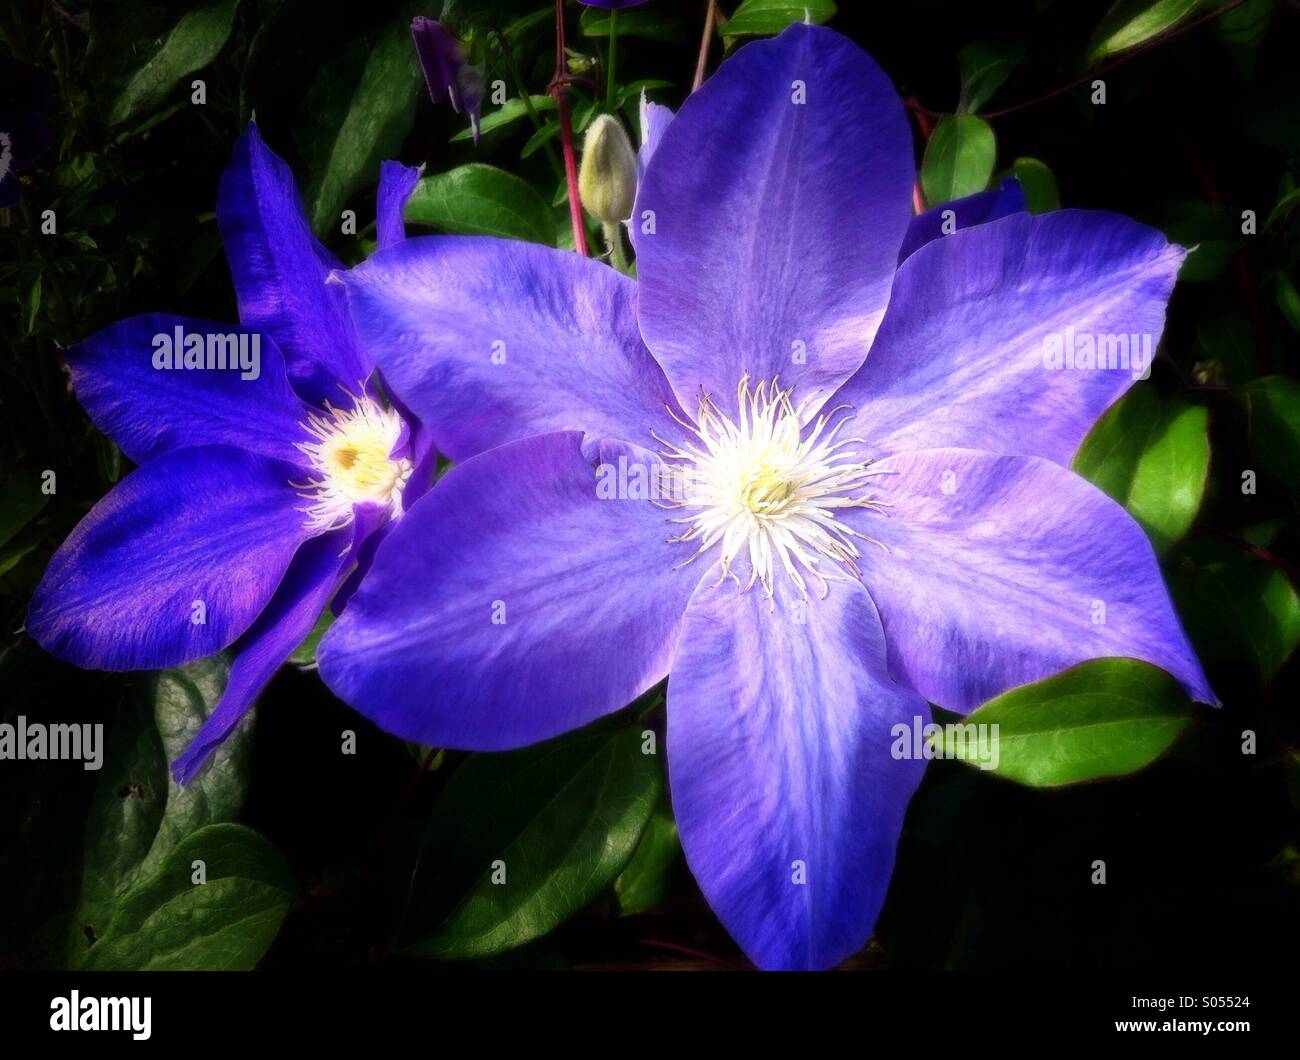 Blue clematis flowers Stock Photo